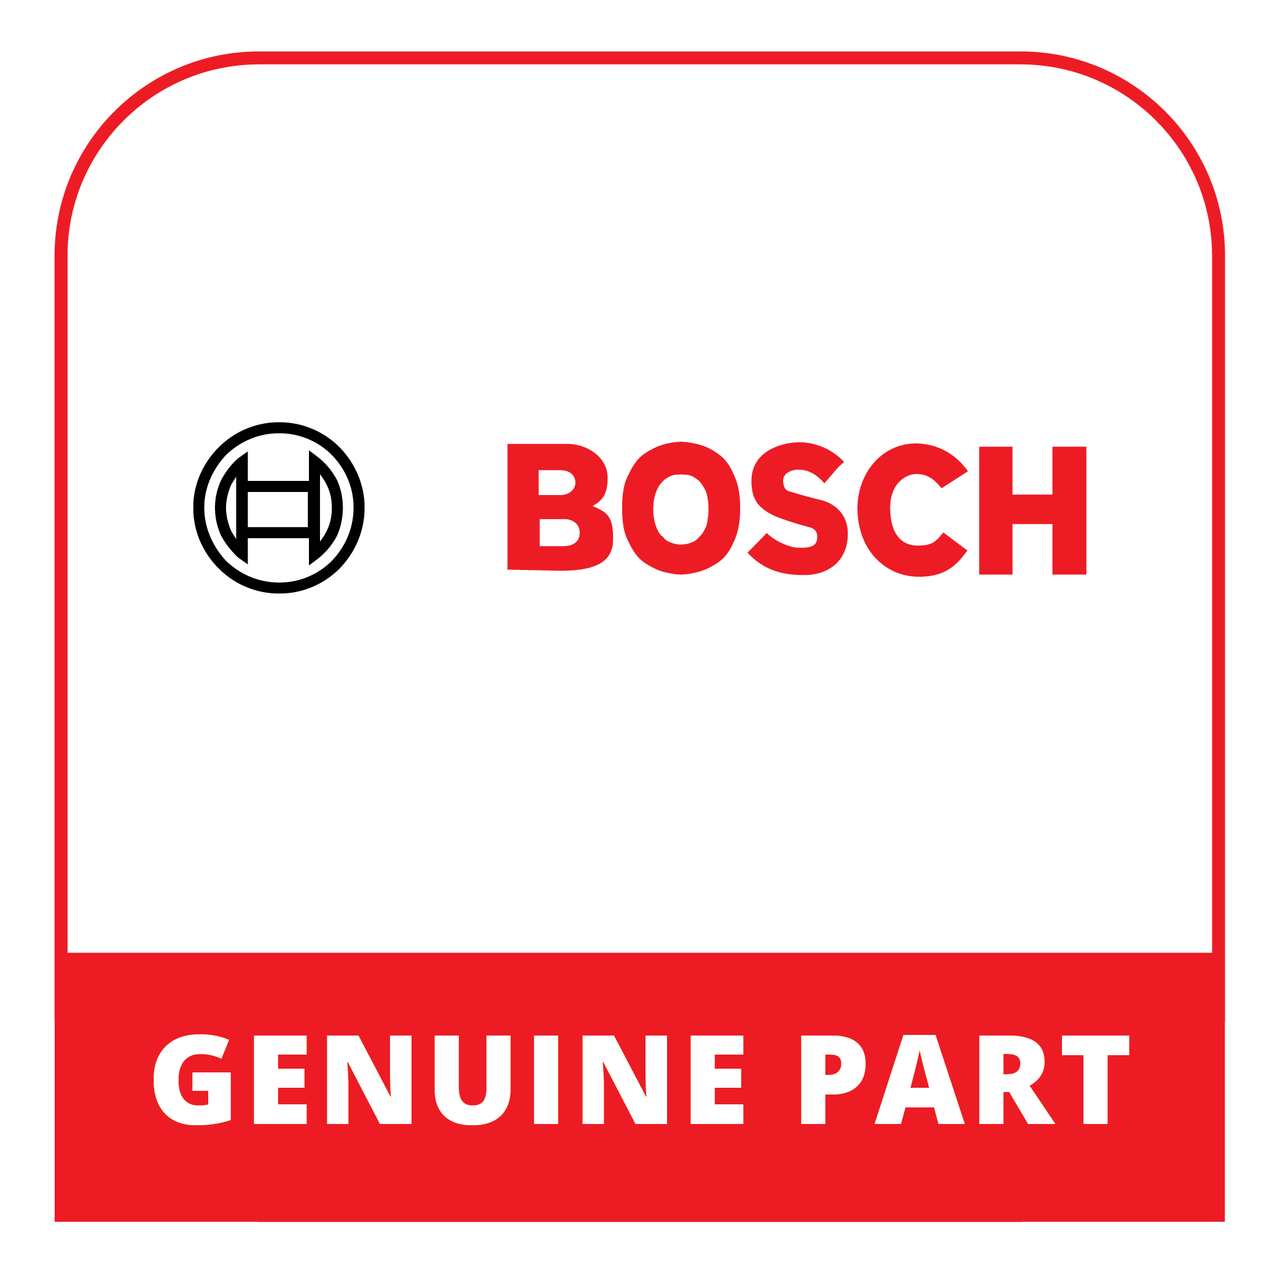 Bosch (Thermador) 18064954 - Instruction Manual - Genuine Bosch (Thermador) Part